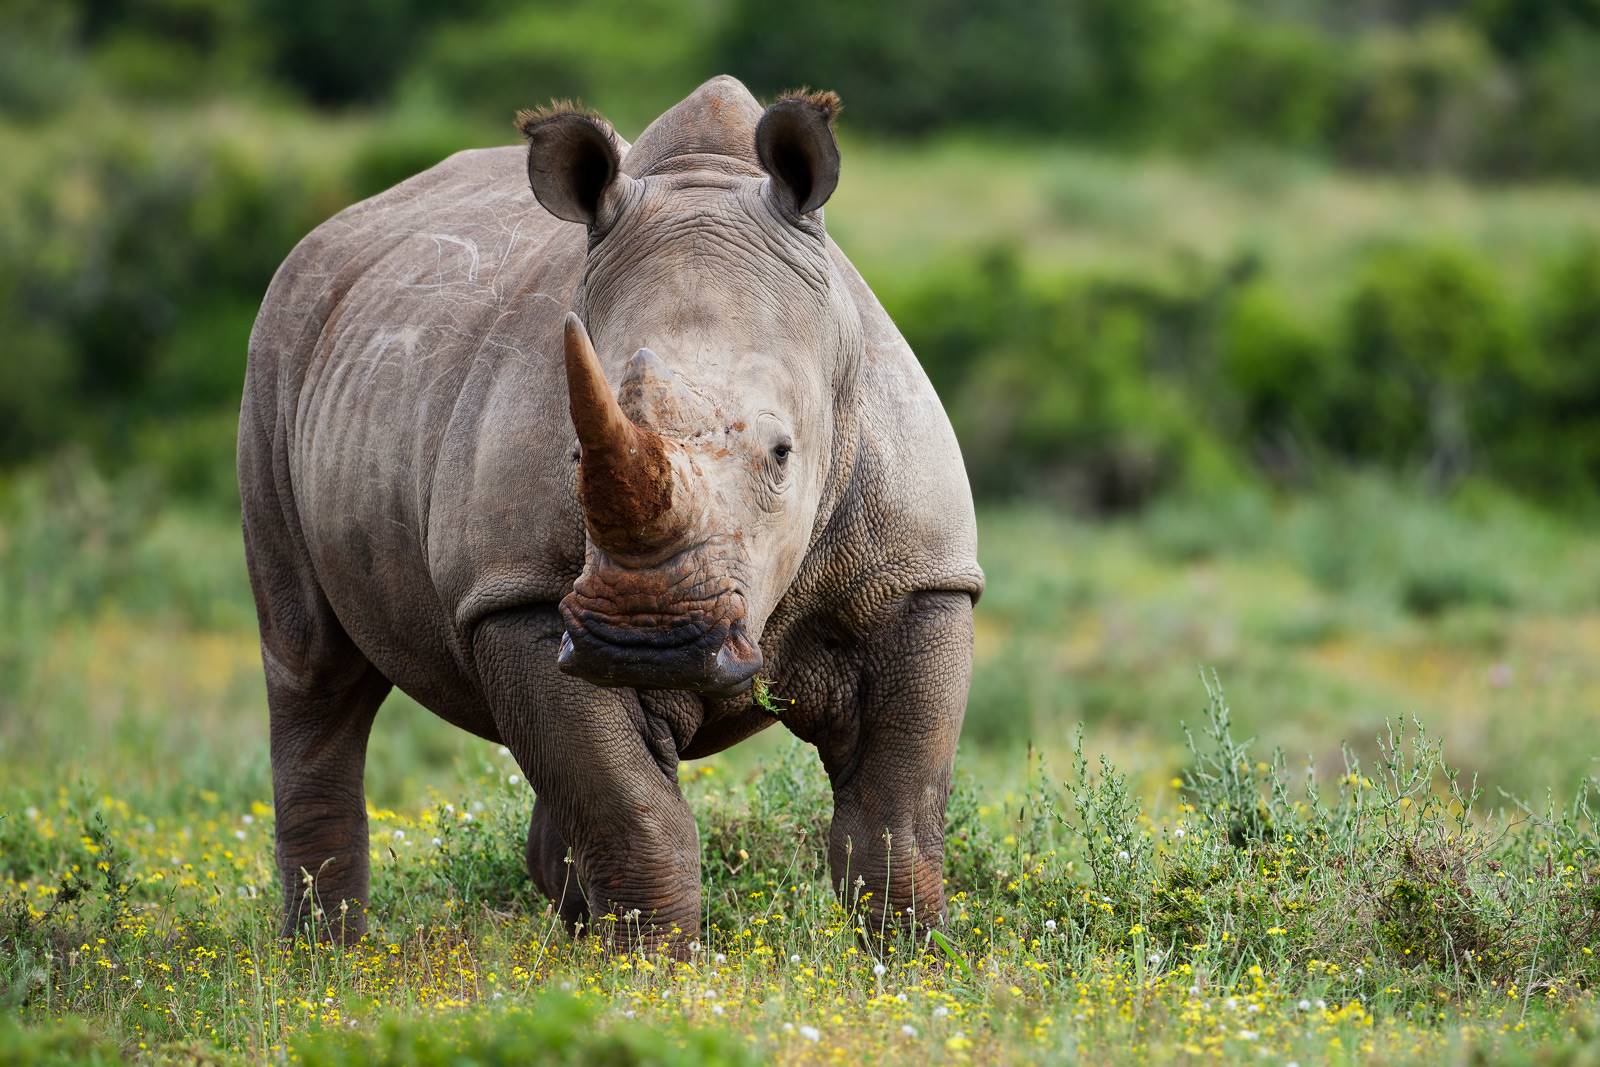 South Africa's Rhino poaching statistics declined in 2020 but the International Fund for Animal Welfare says the Kruger National Park remains a concern as 62% of rhinos (245 rhinos) poached were killed in the KNP. 